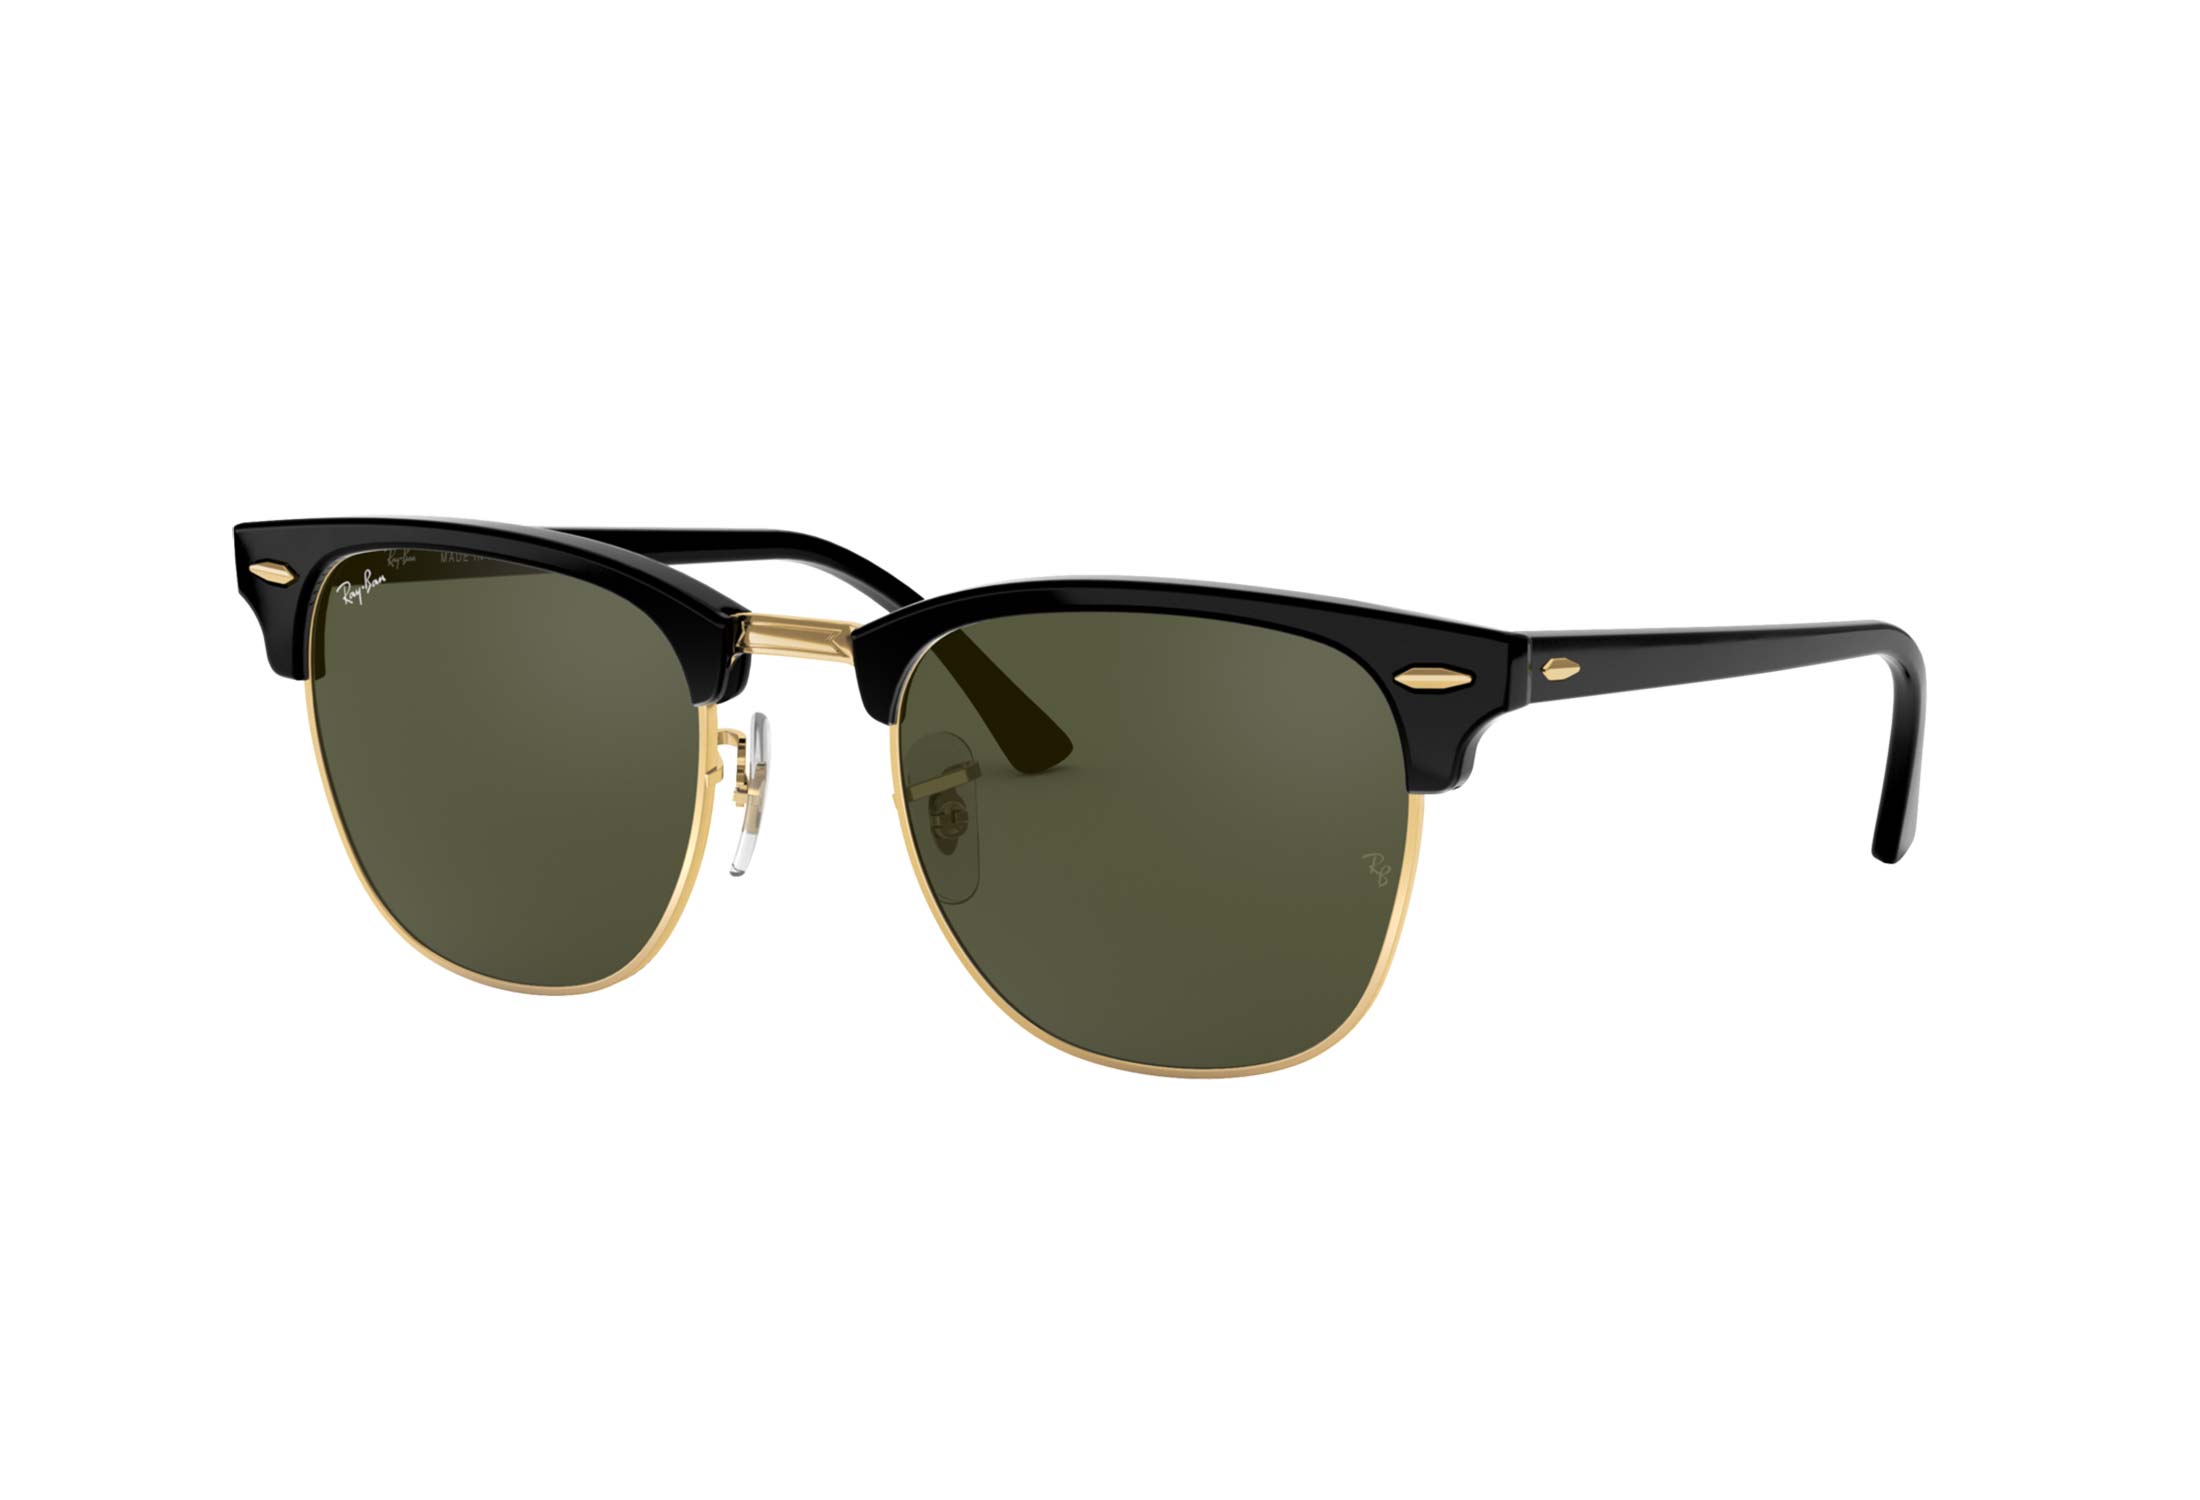 Ray-Ban Clubmaster rb3016 w0365 - Green